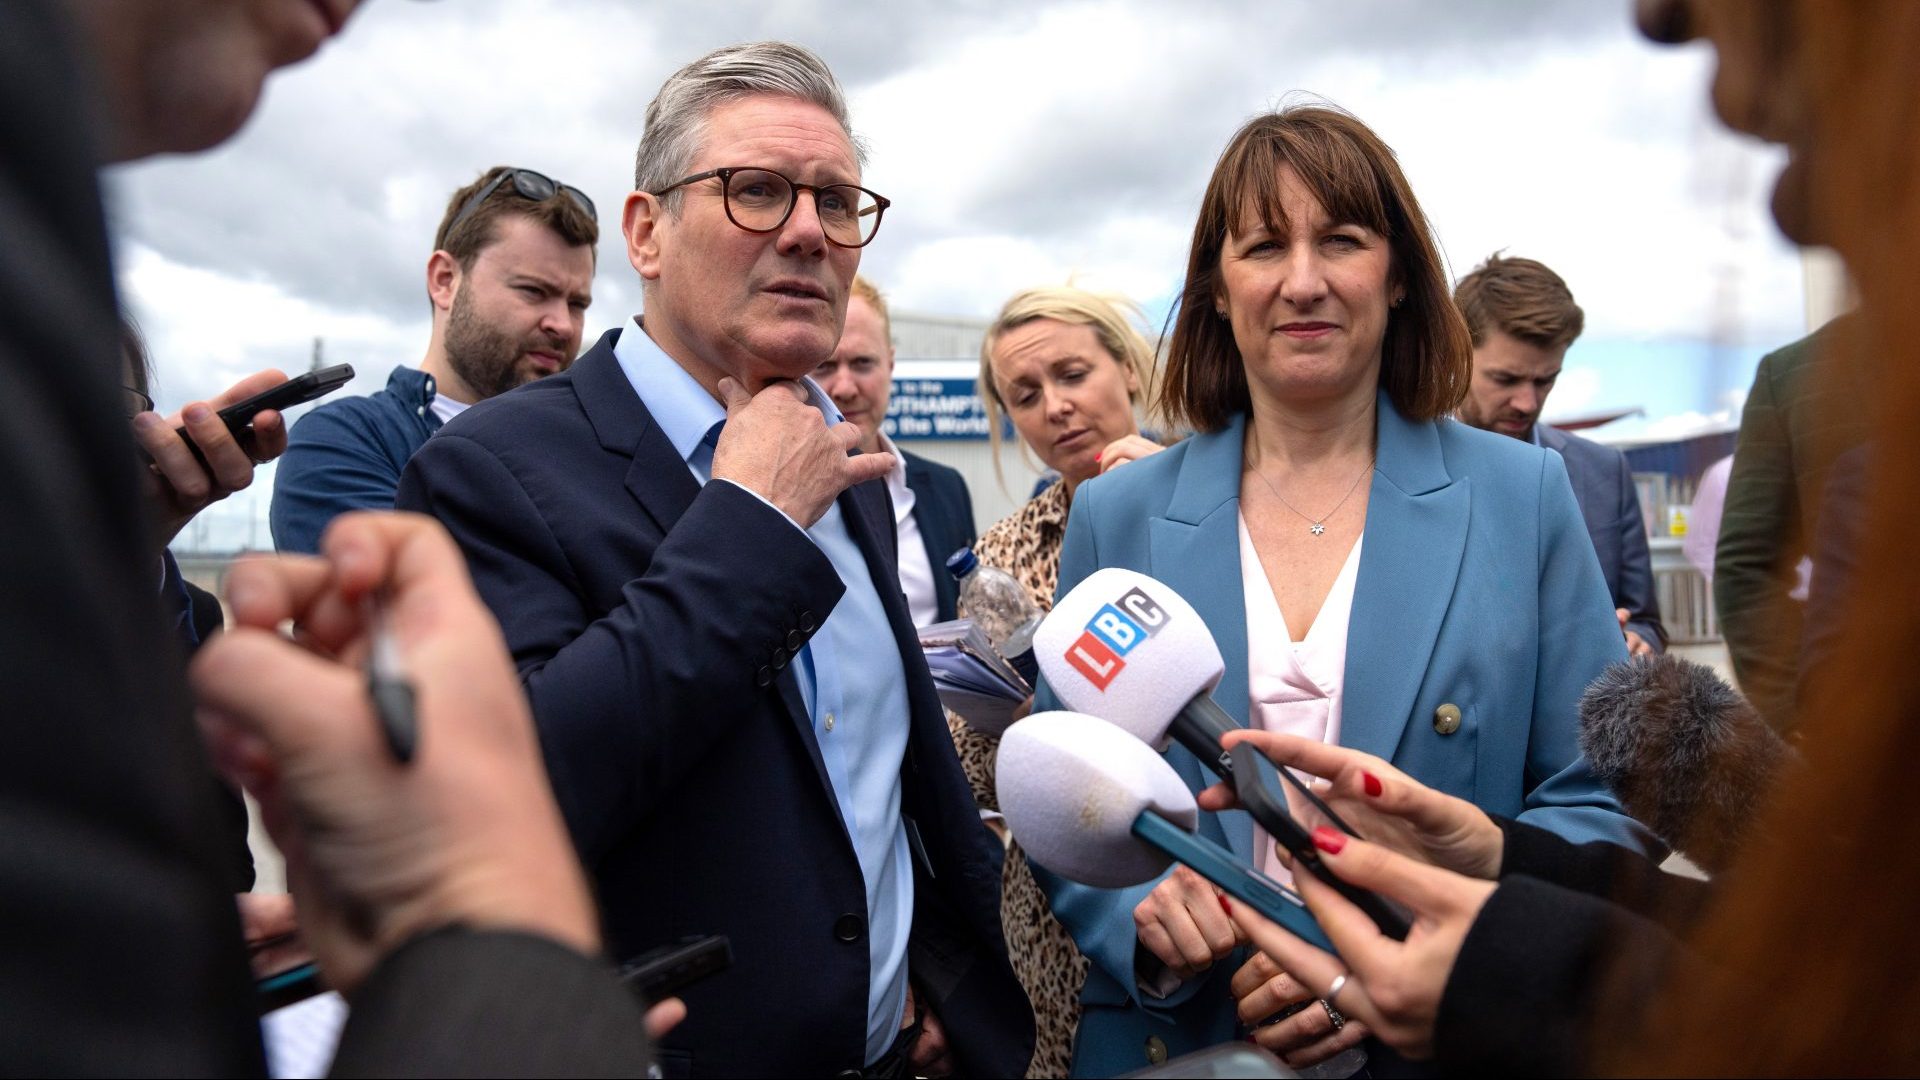 Sir Keir Starmer And Shadow Chancellor Rachel Reeves launch Labour's green investment plans at the Port of Southampton (Photo by Carl Court/Getty Images)